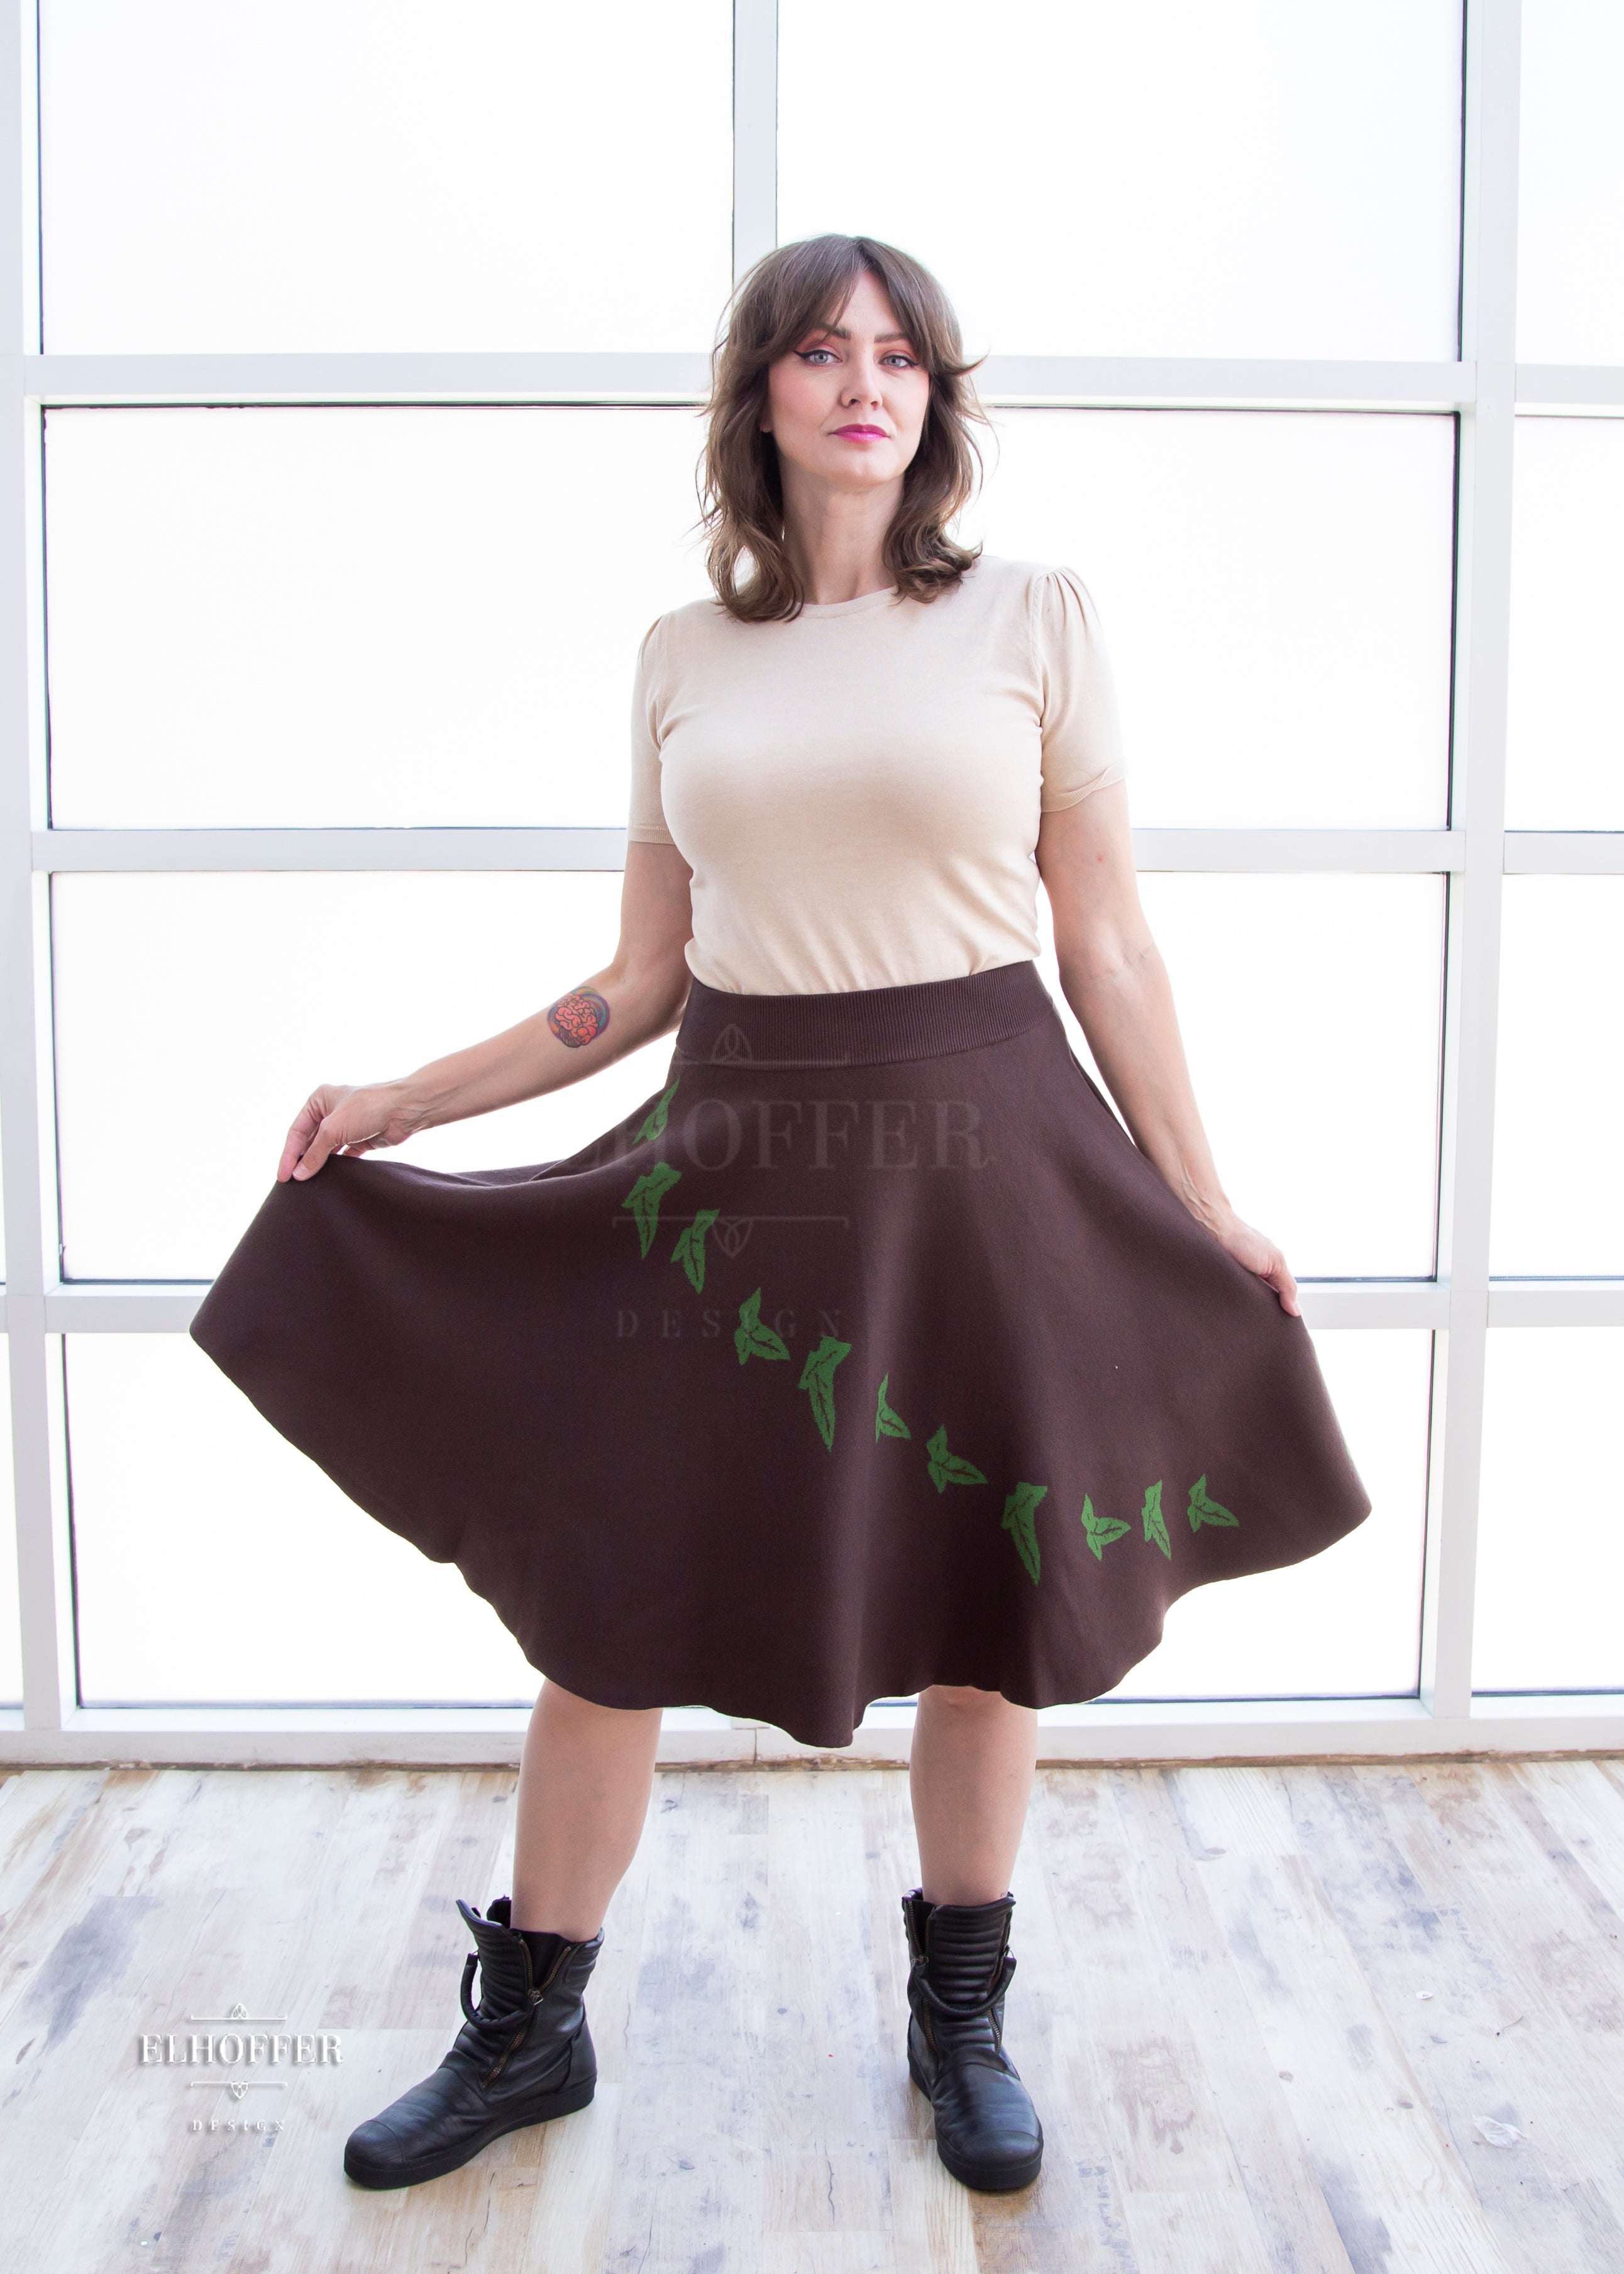 Ashley, a light skinned M/L model with brown hair, is wearing a brown knit skirt that hits just passed the knee and has a cascading green leaf design and an oatmeal colored lightweight knit t-shirt style top.